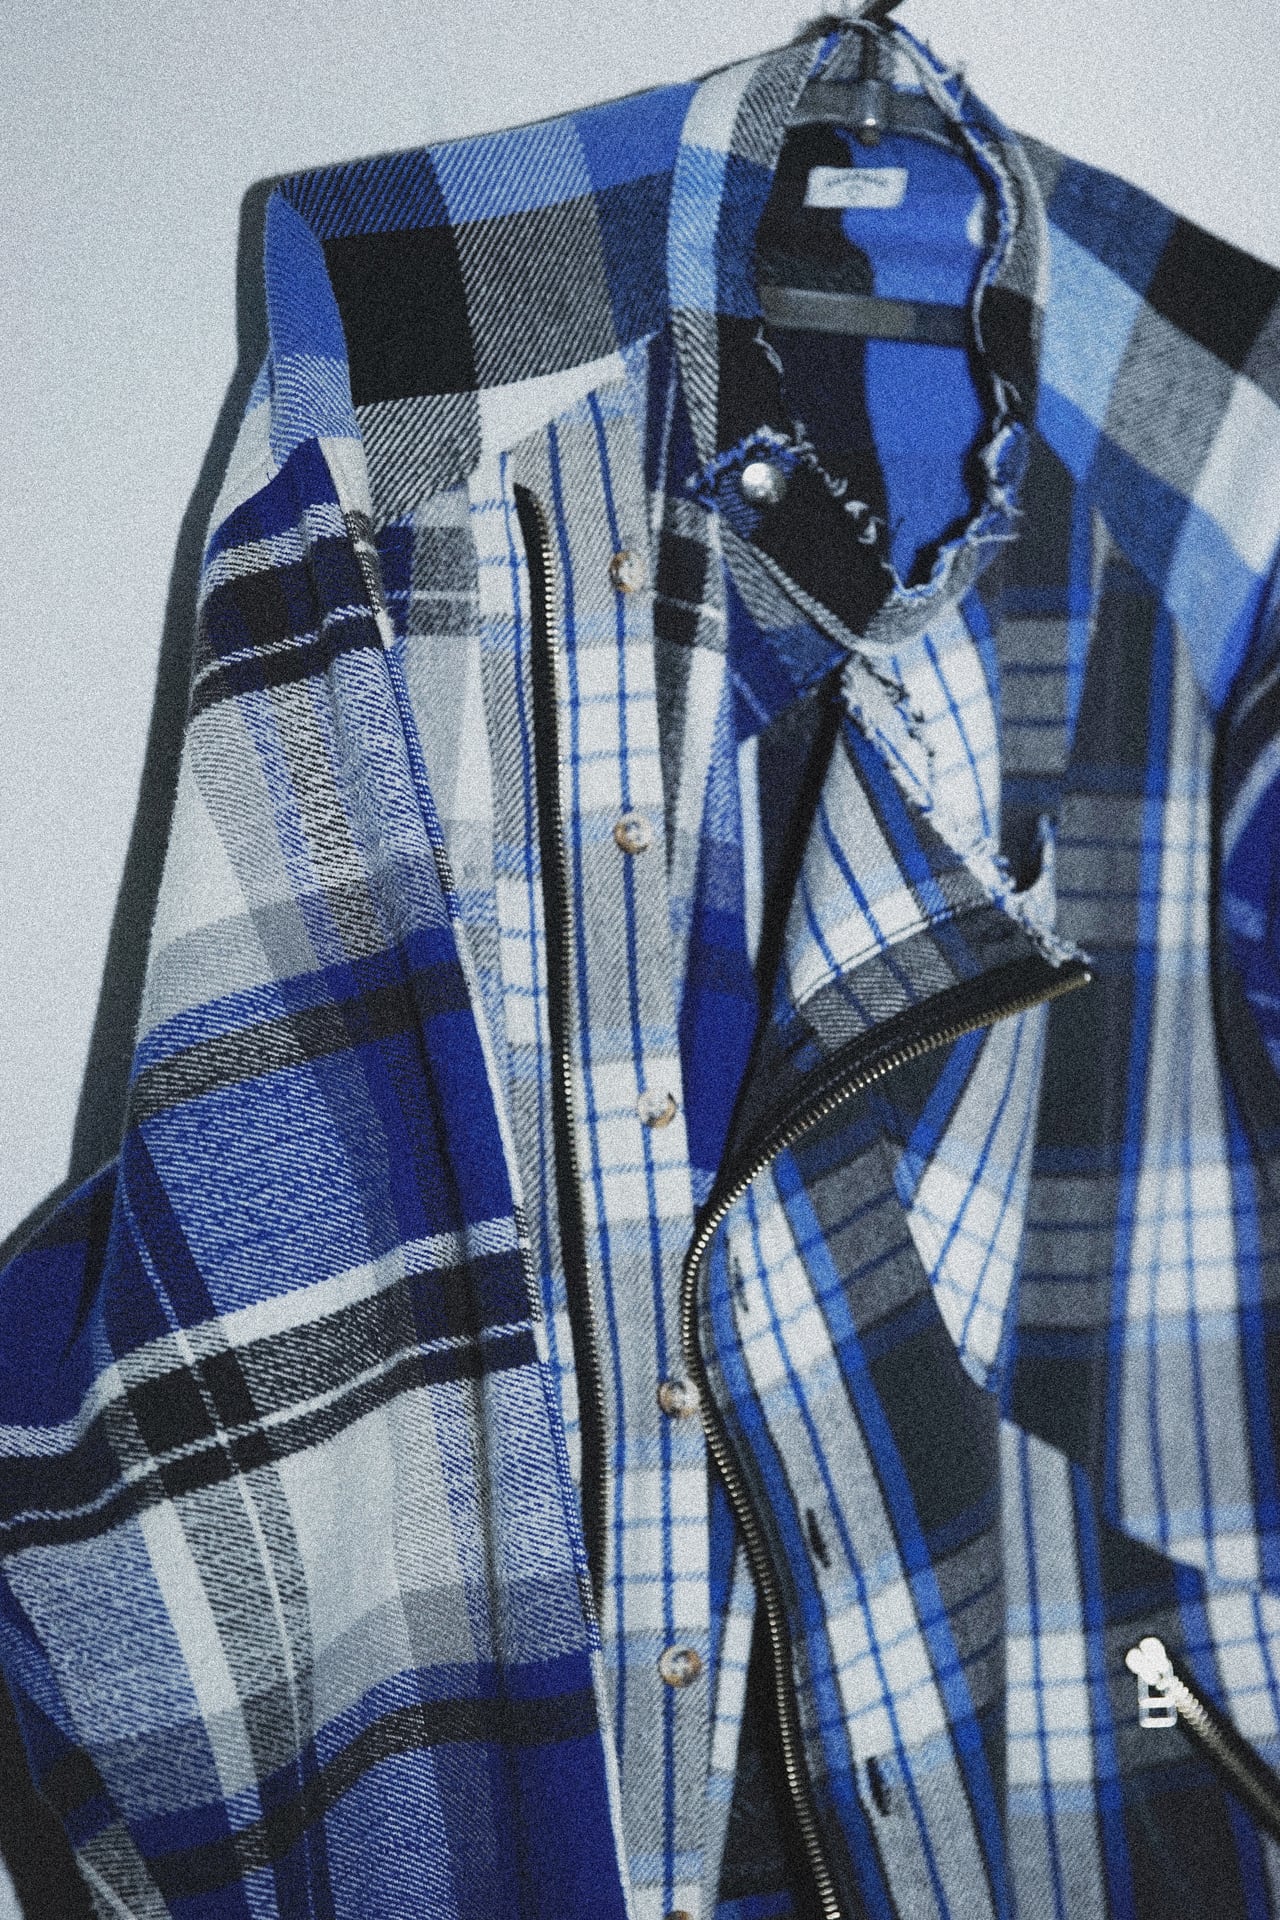 OVERSIZED RIDERS SHIRT FLANNEL [M]